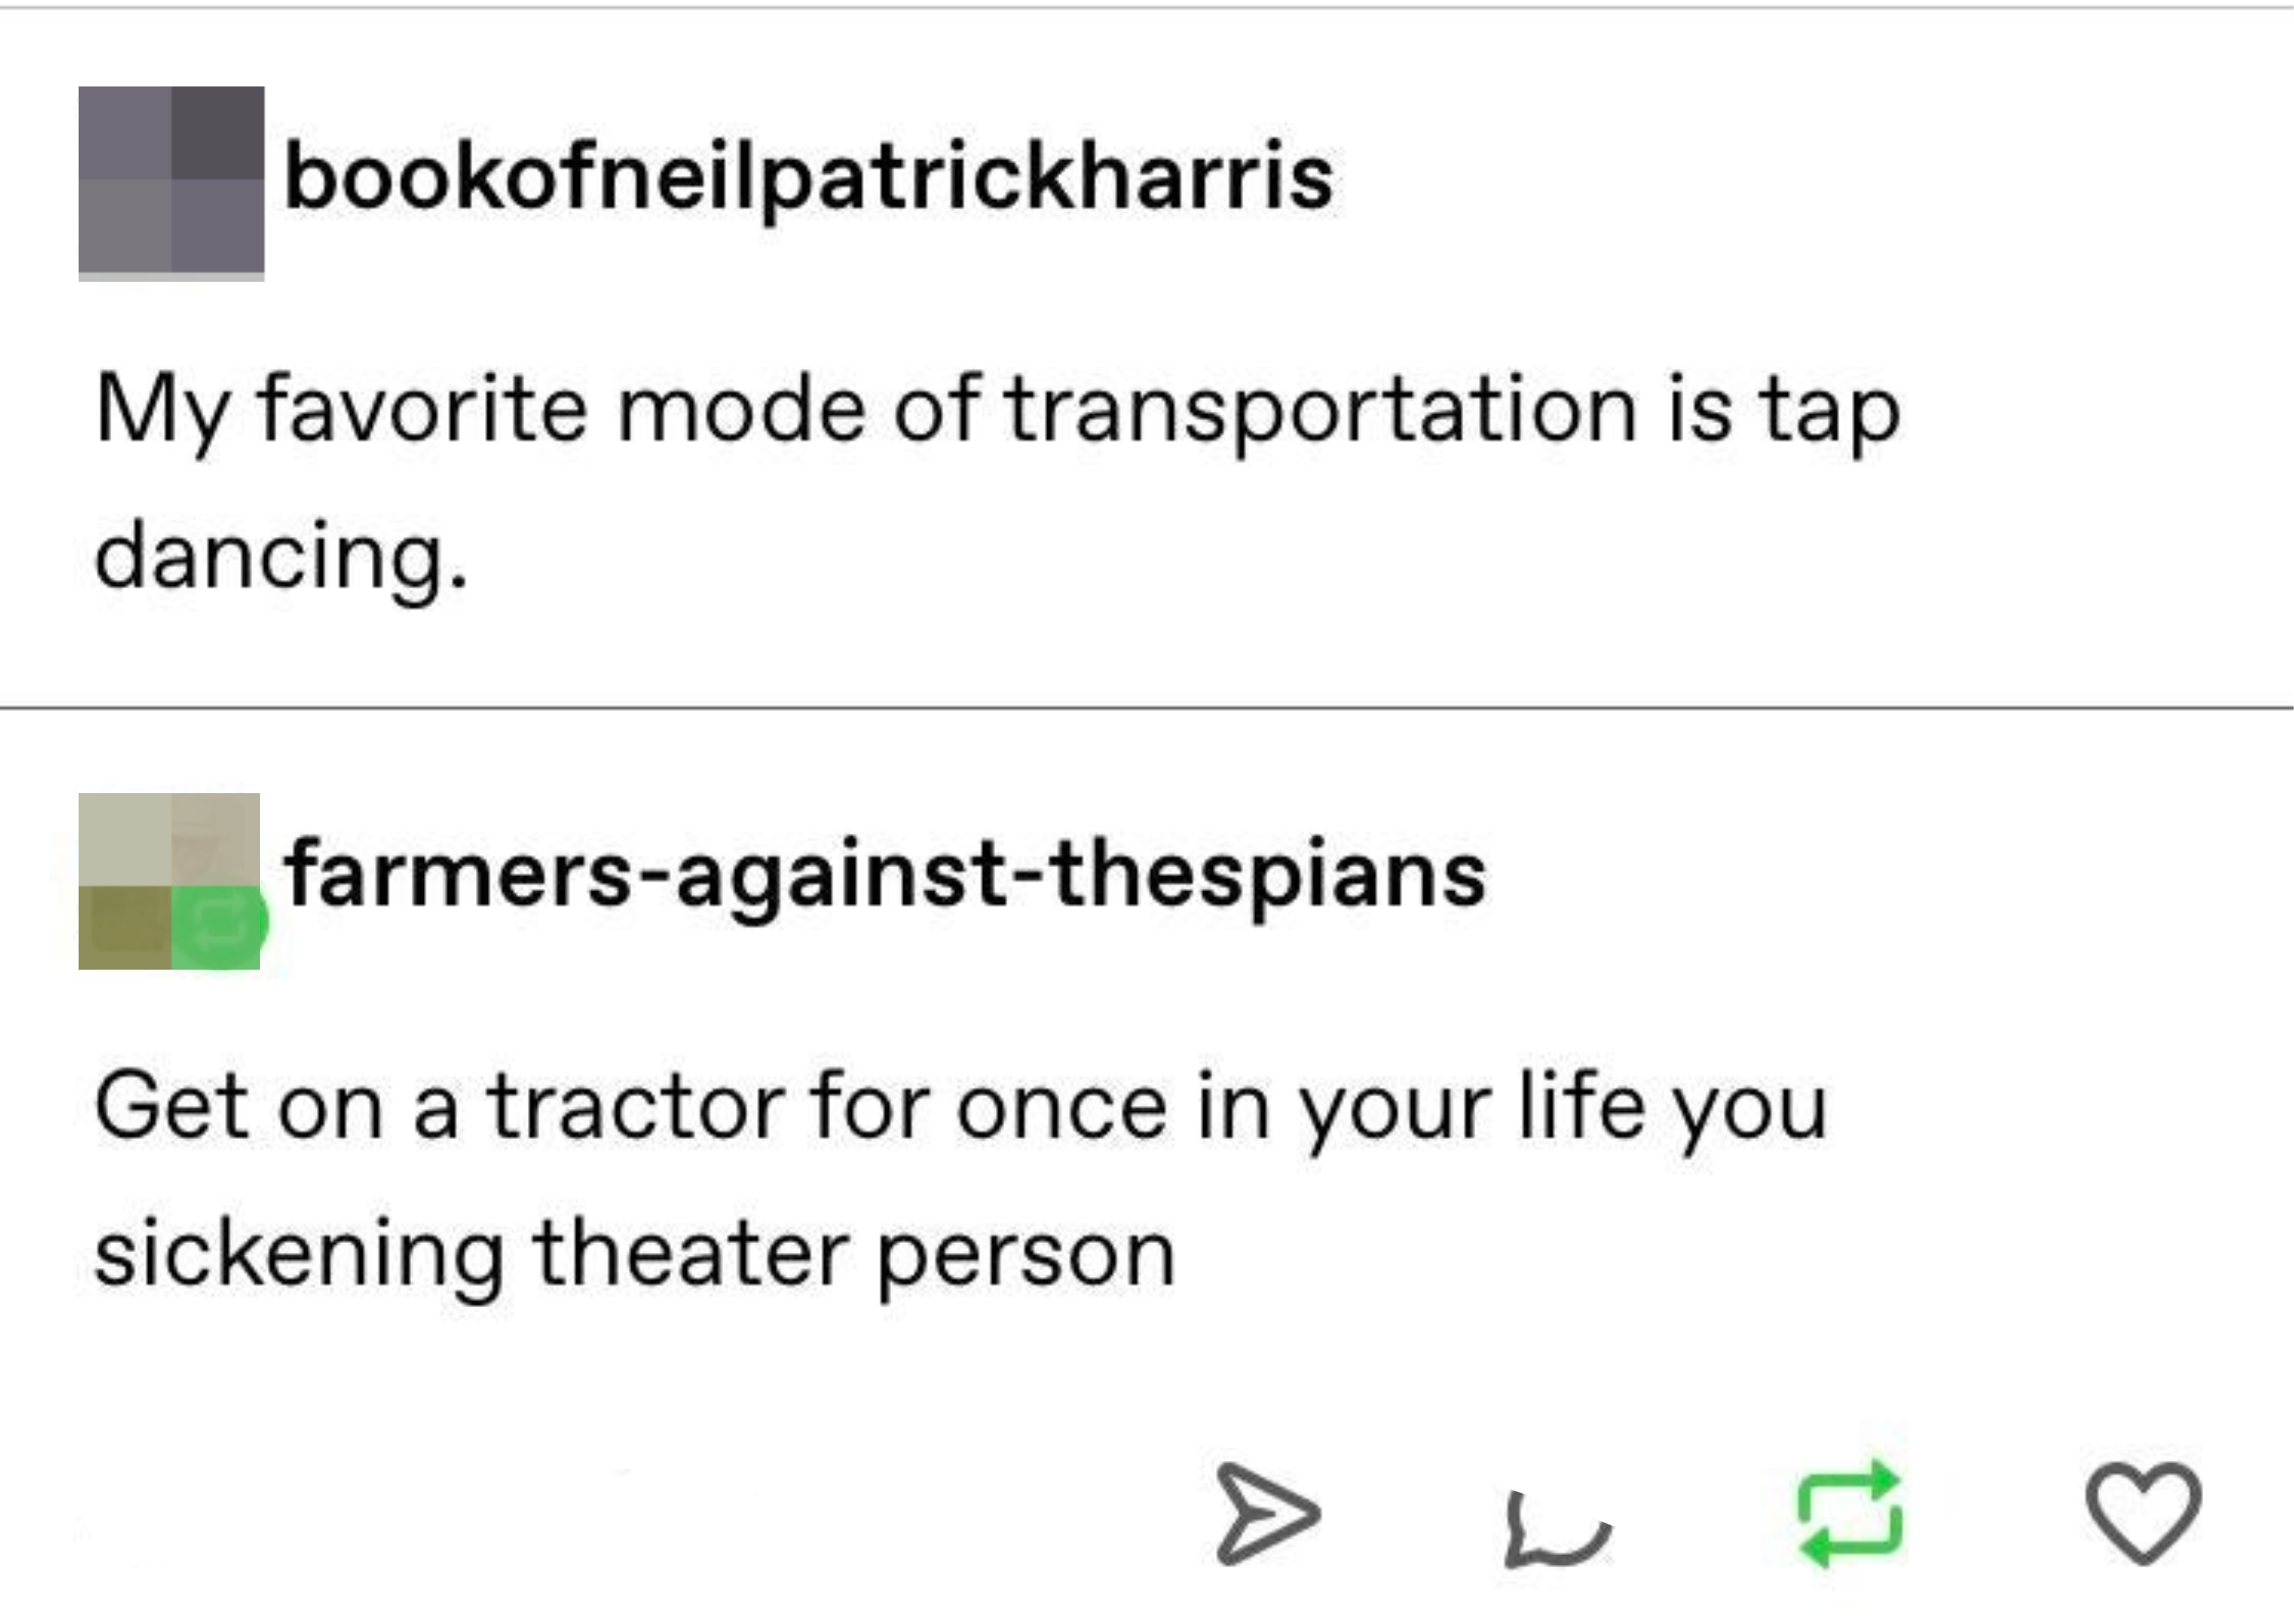 &quot;Get on a tractor for once in your life you sickening theater person&quot;